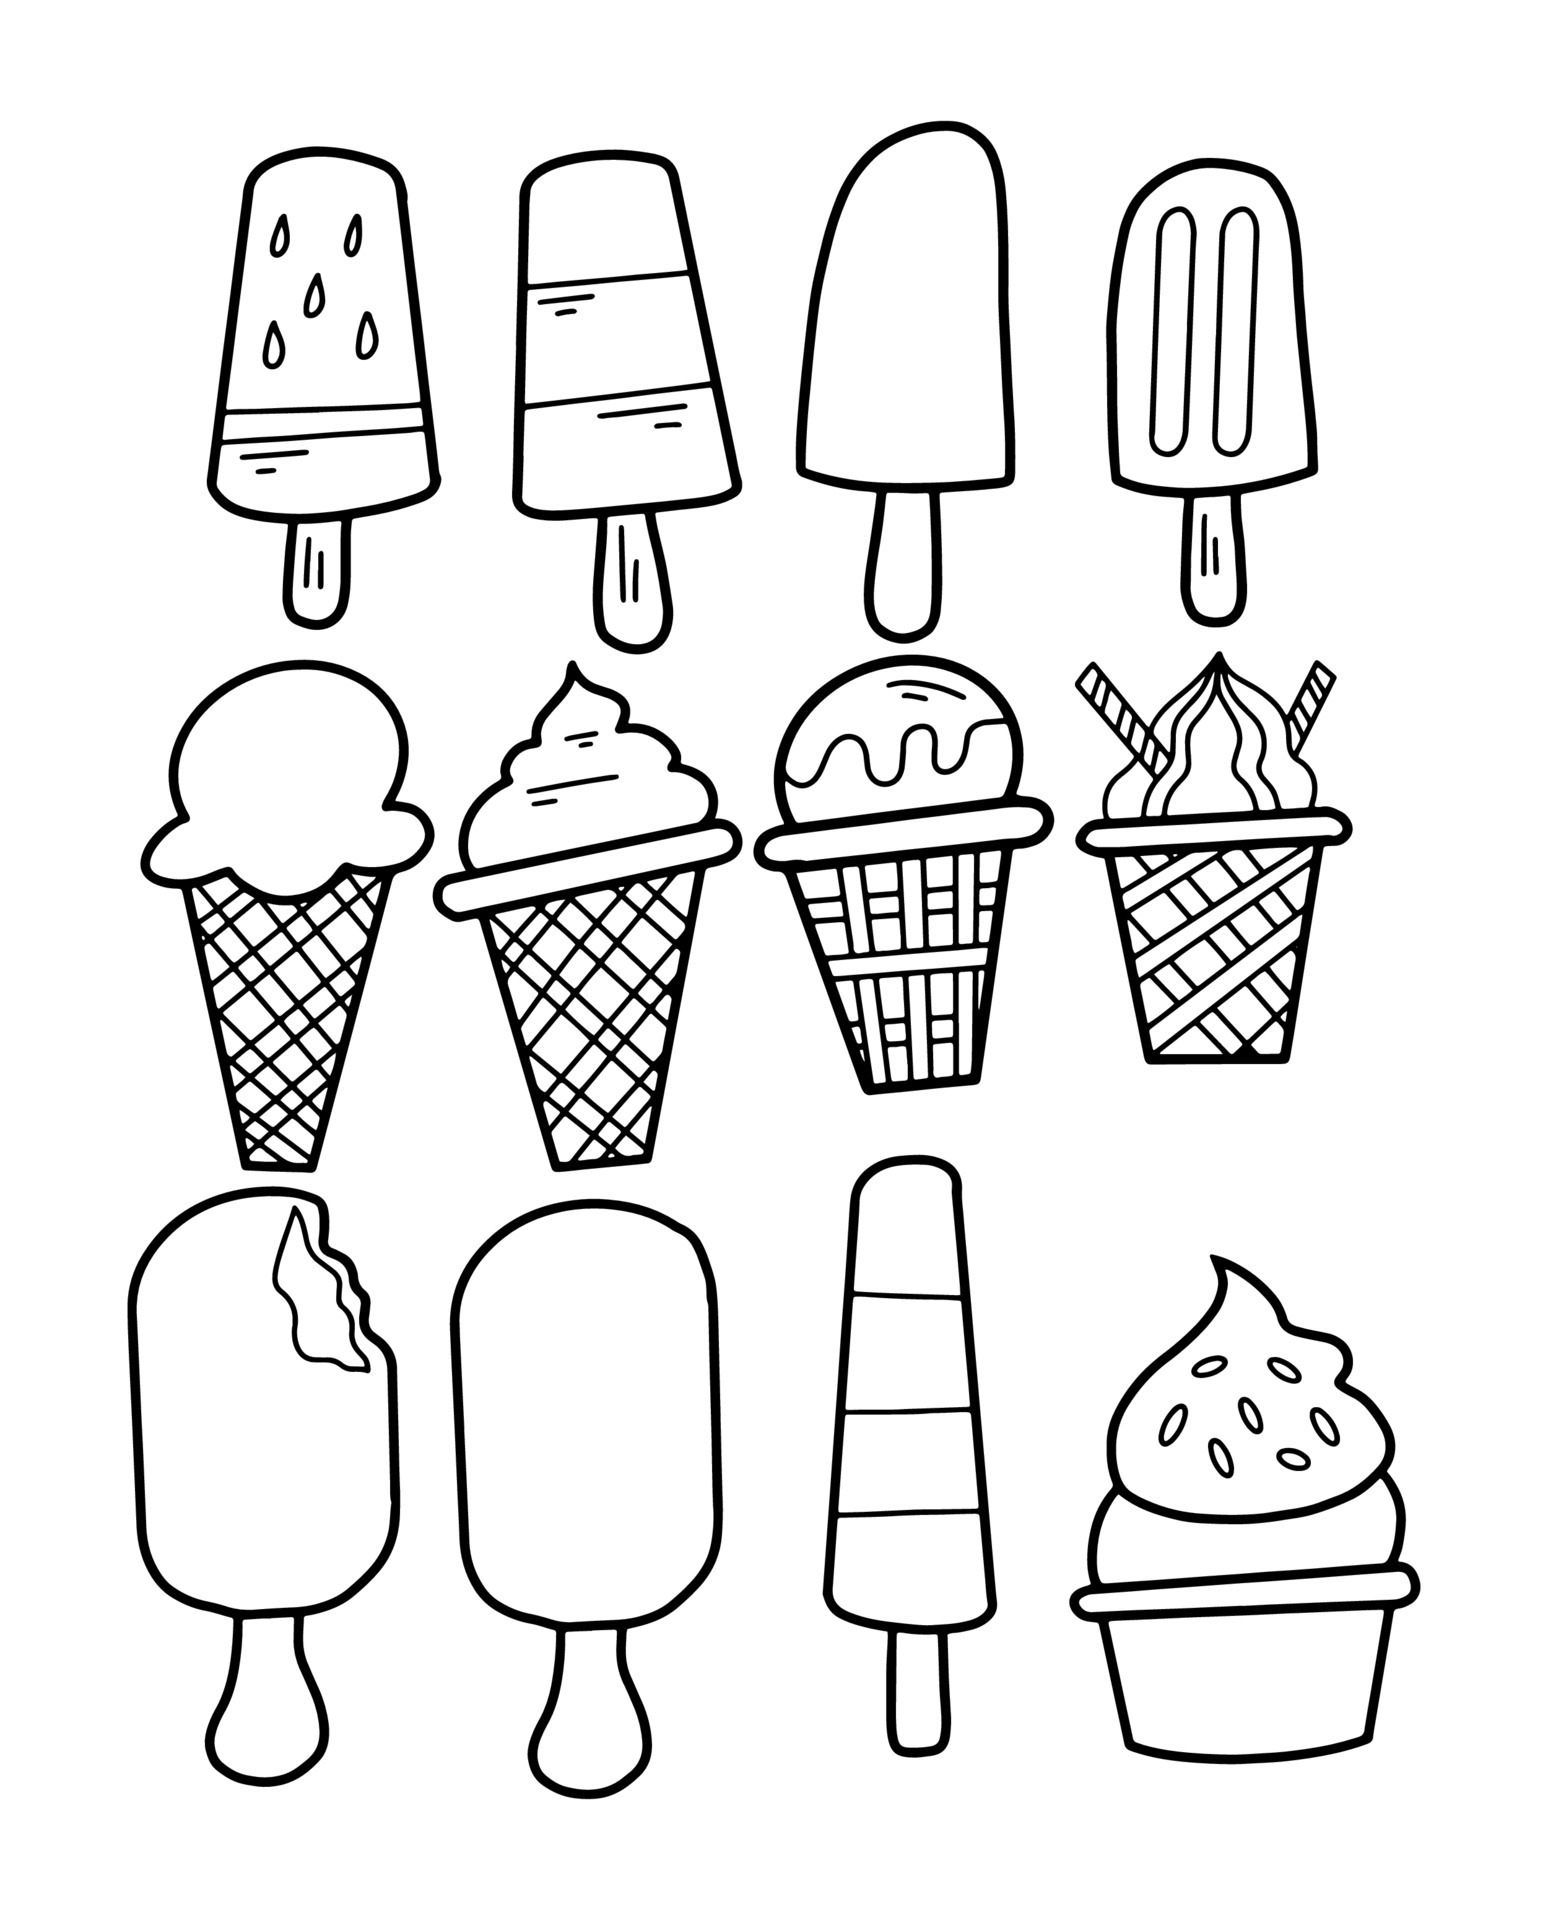 Bucket of ice cream. Illustration in doodle style 24796520 PNG